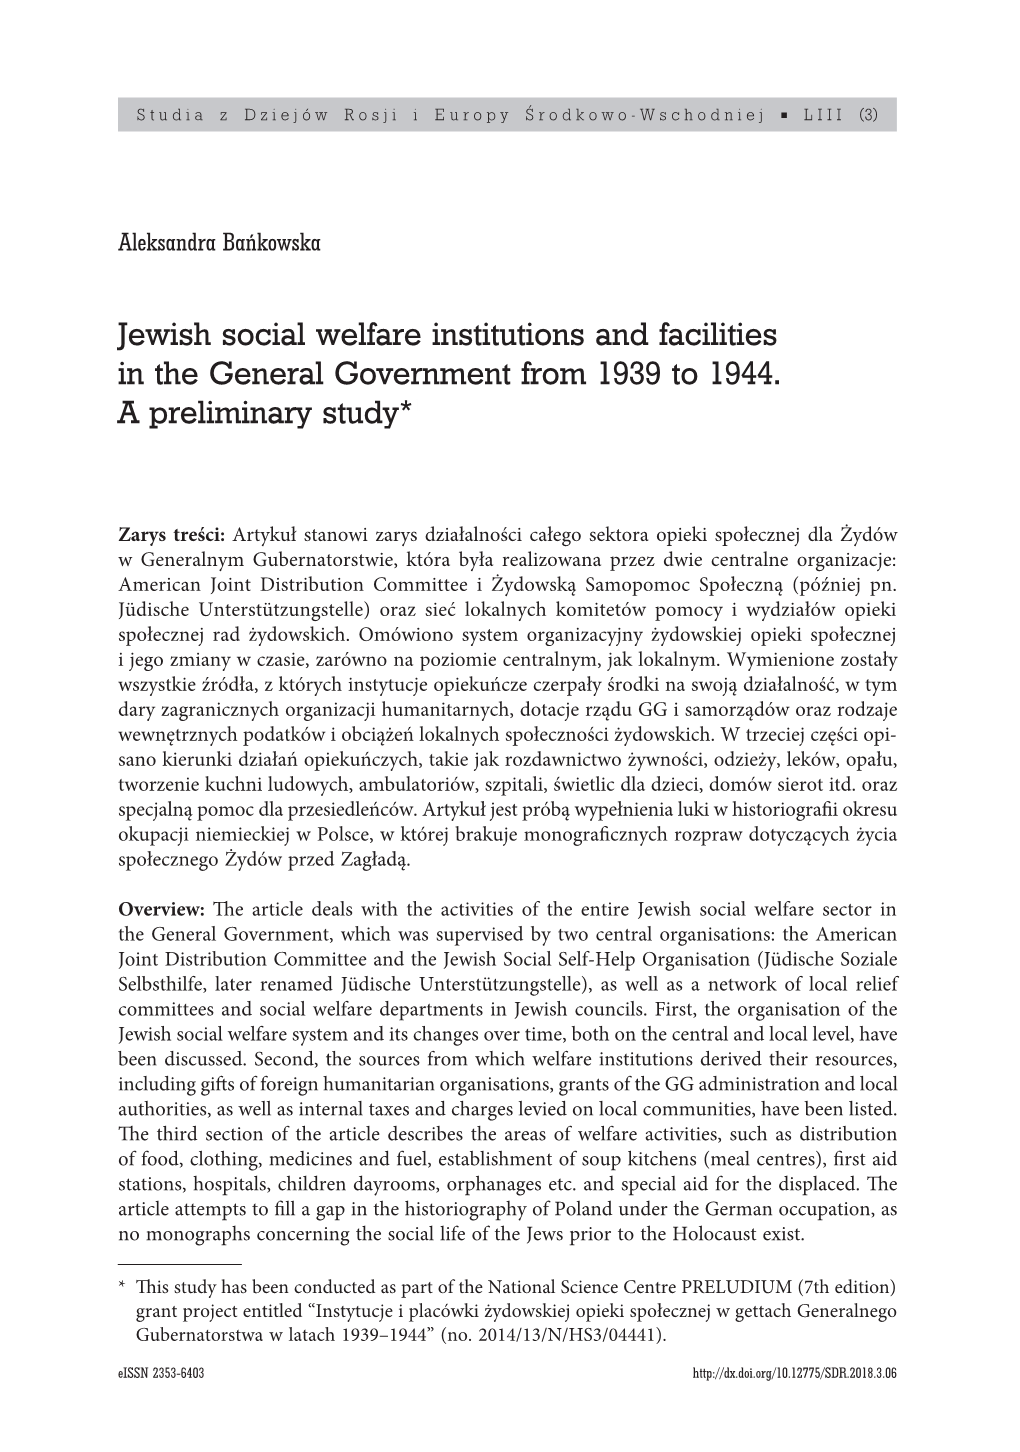 Jewish Social Welfare Institutions and Facilities in the General Government from 1939 to 1944